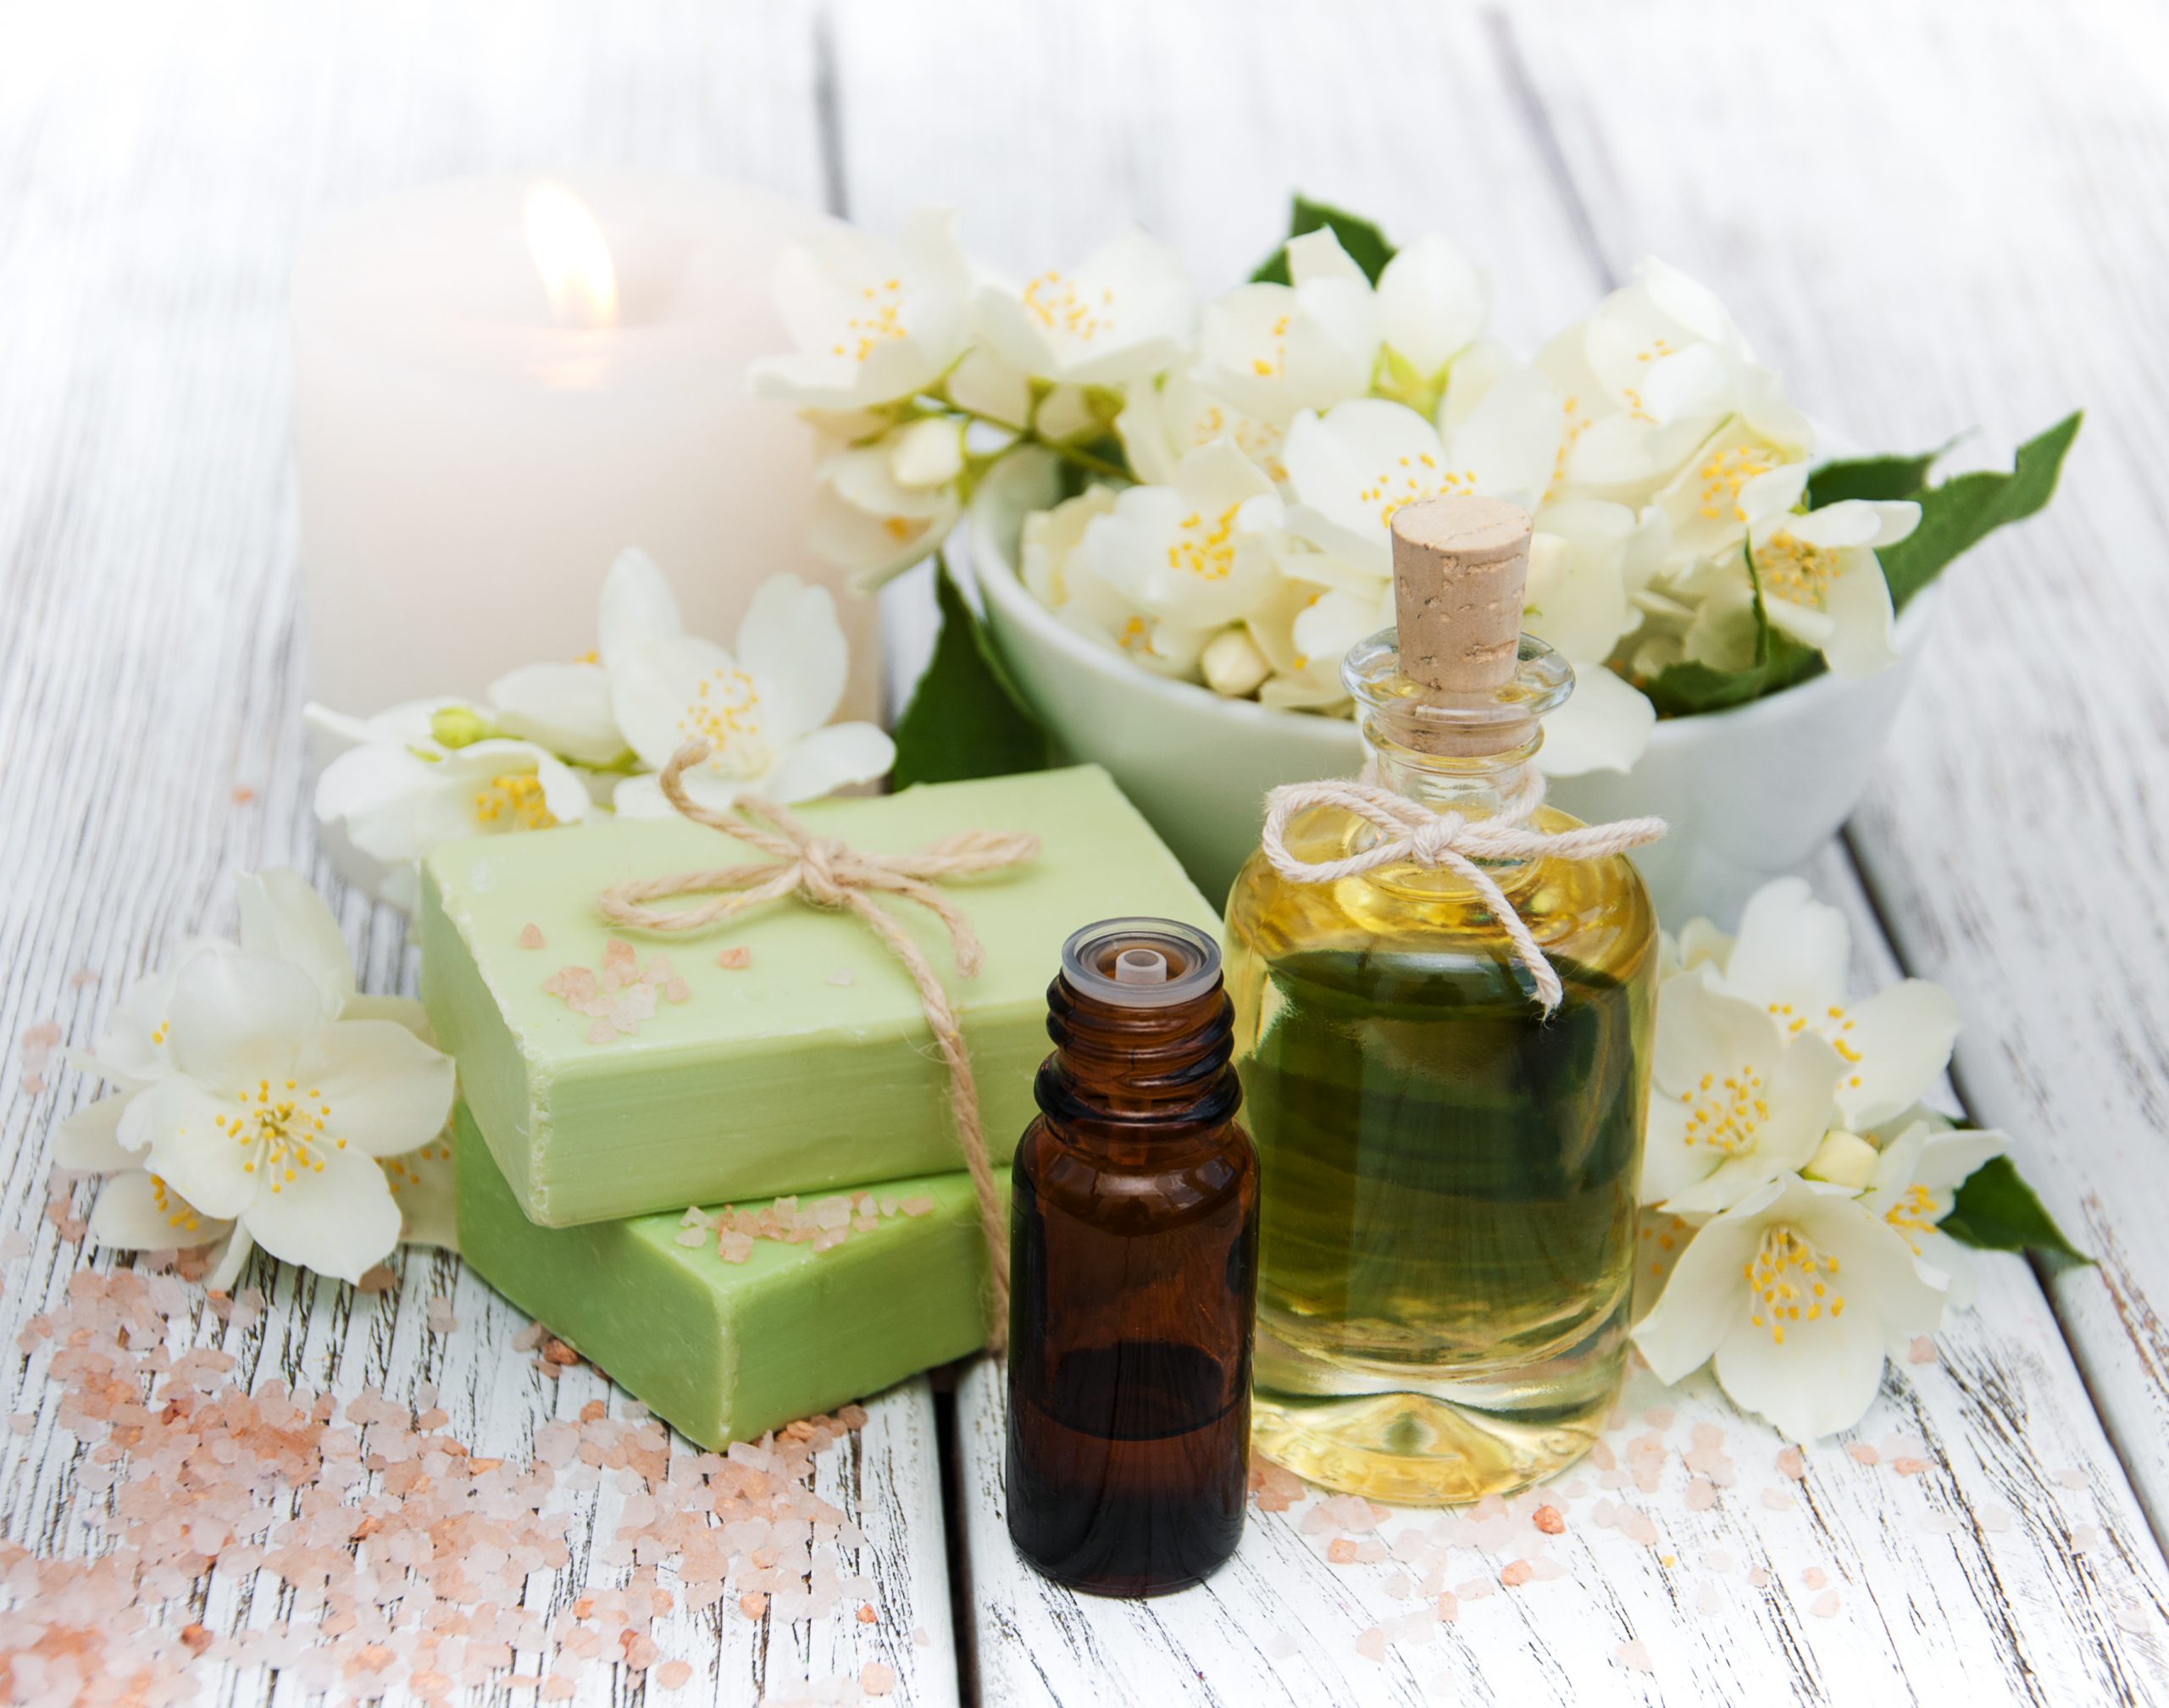 Combining the Best Essential Oils for Soap Making